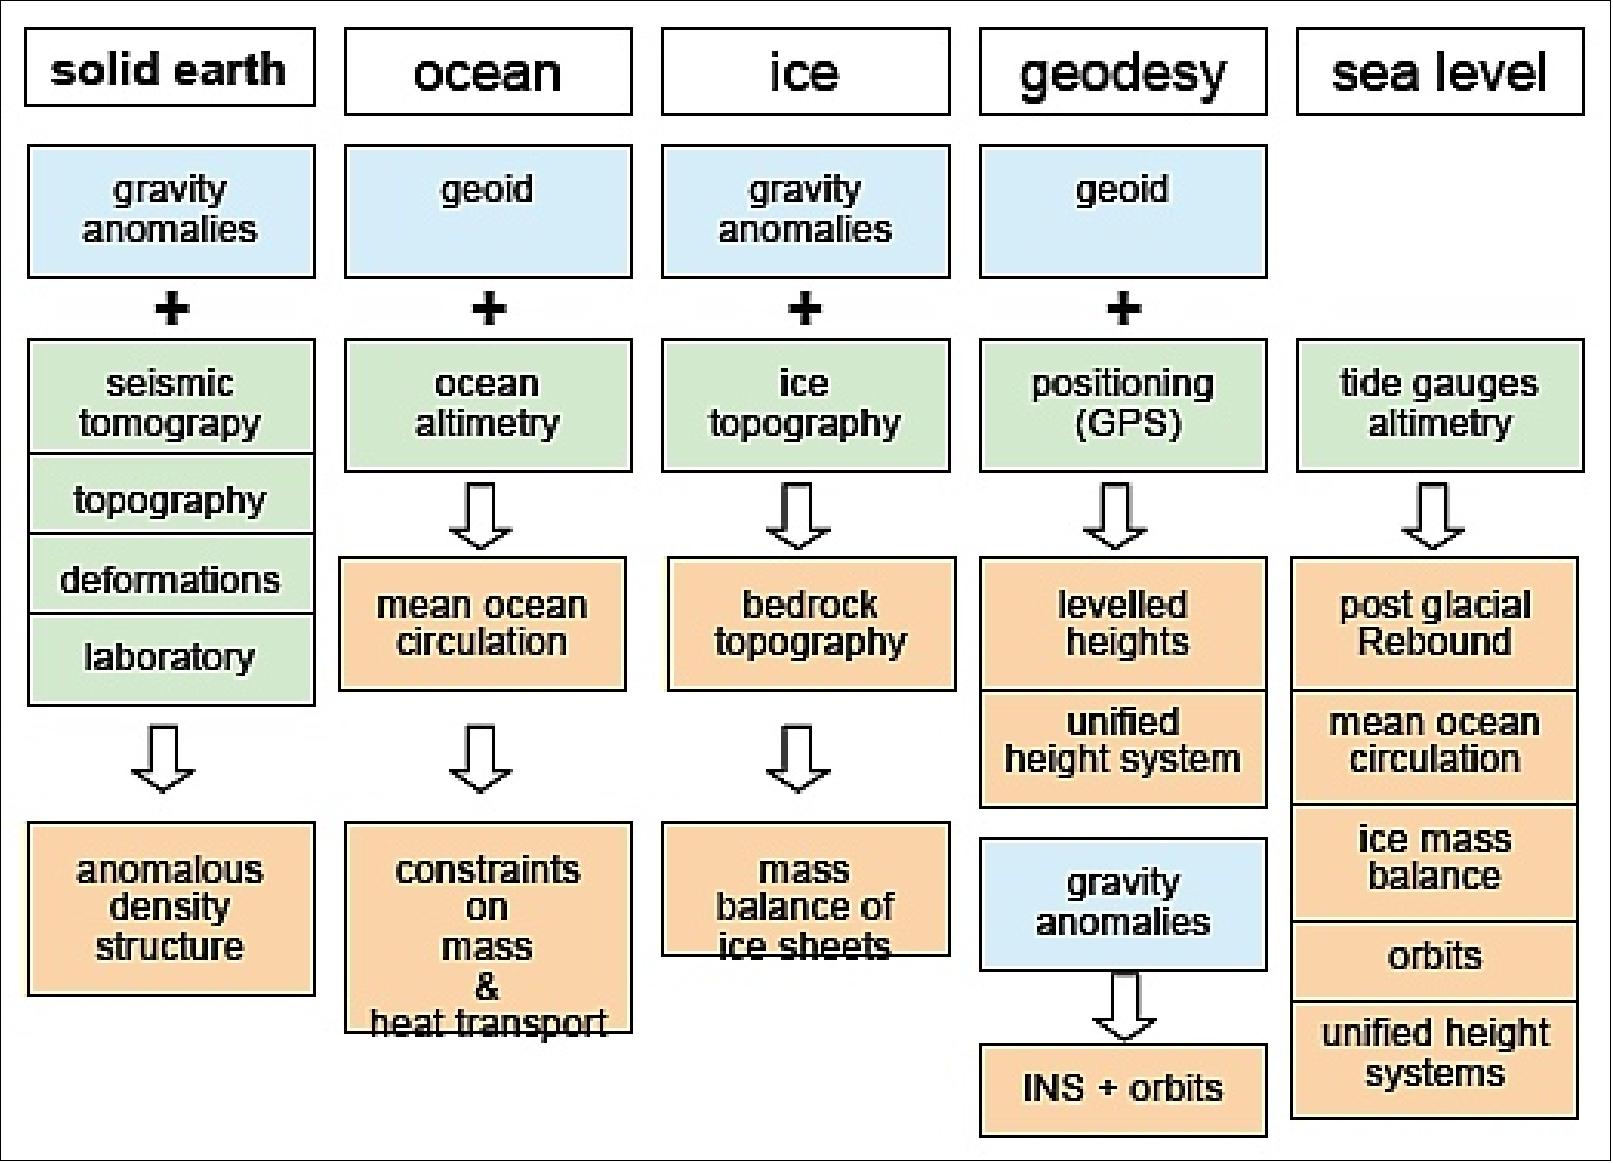 Figure 2: Overview of science applications to be covered by GOCE observations (image credit: ESA)